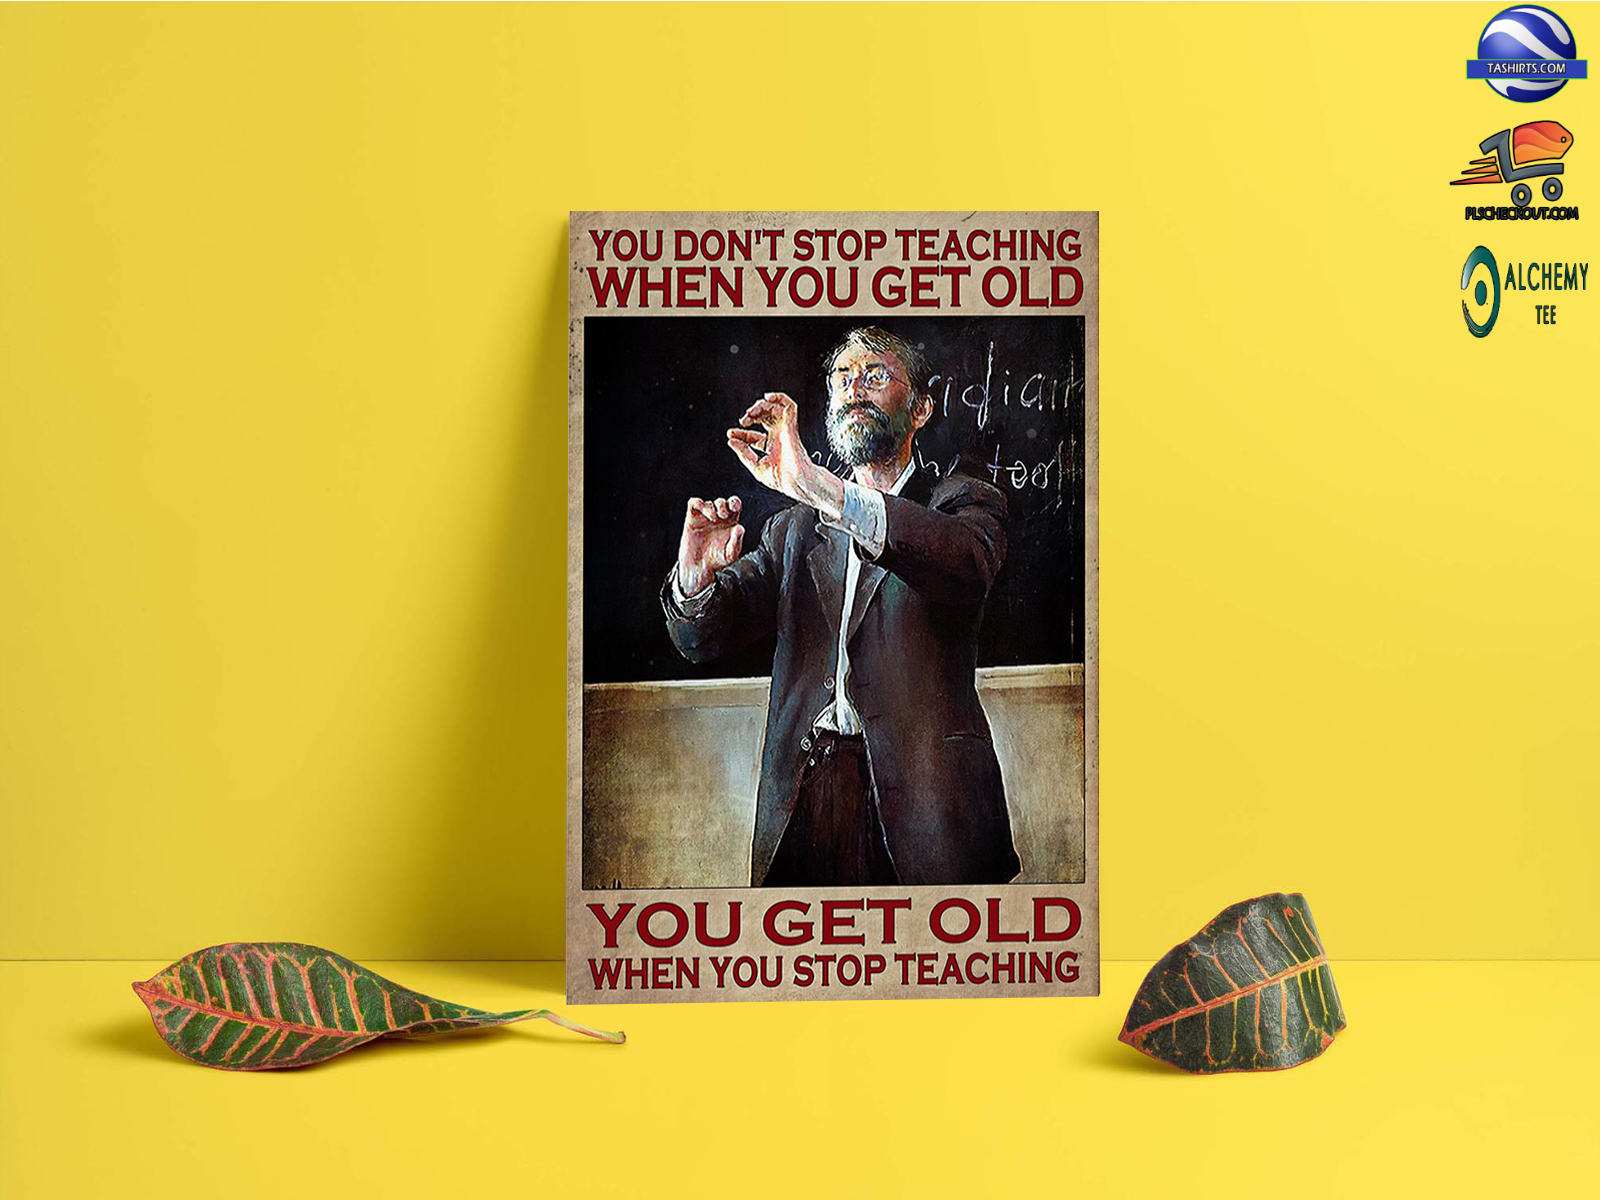 You don't stop teaching when you get old you get old when you stop teaching poster